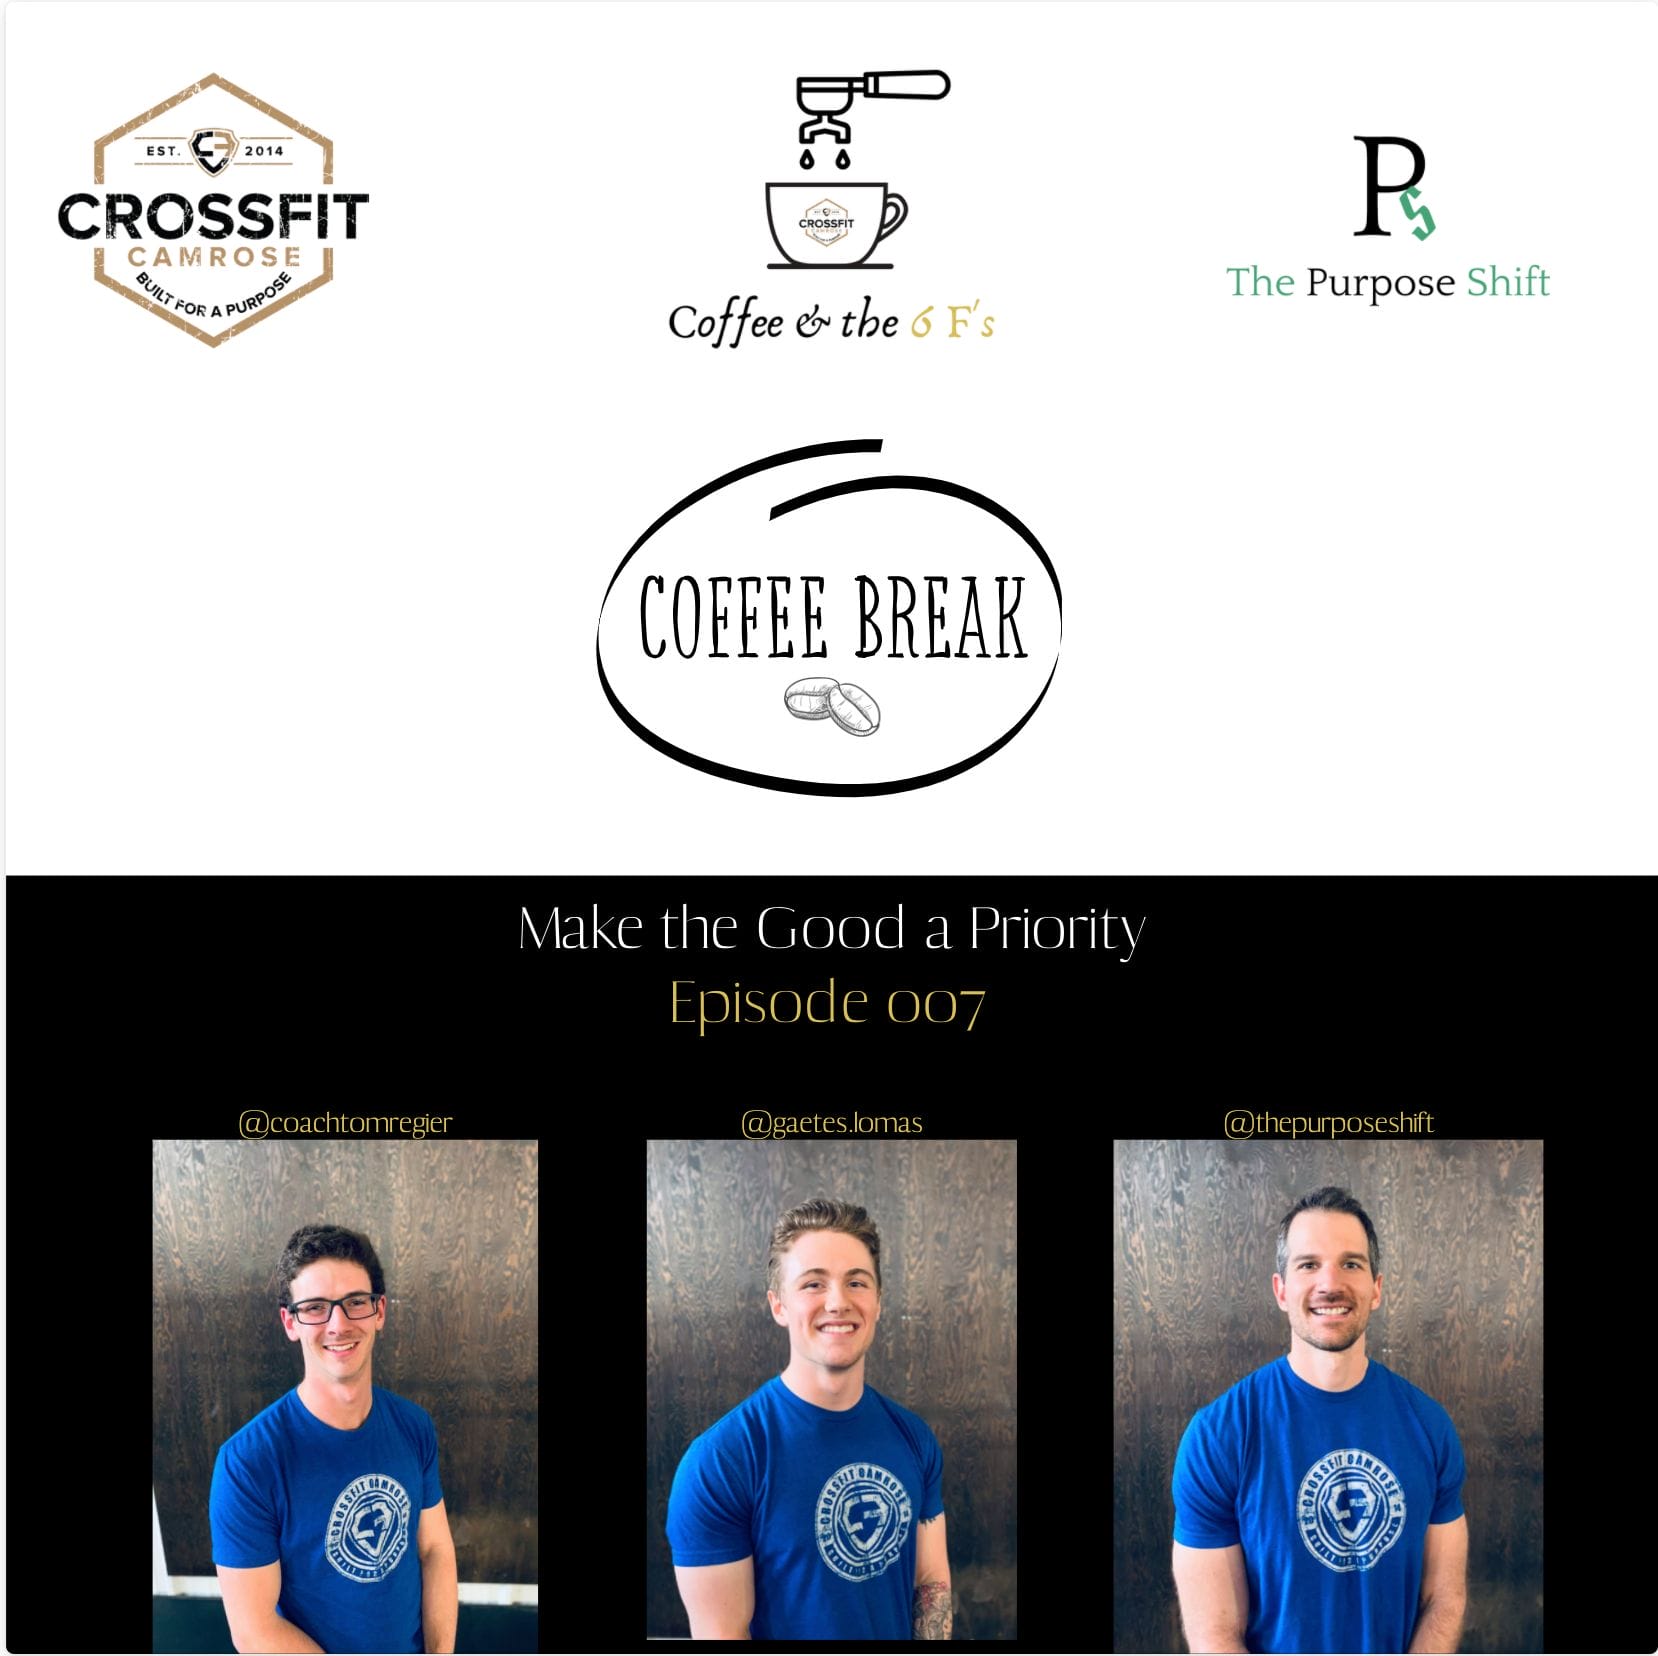 Coffee and the 6 F's - Episode 007 - Make the Good in Life a Priority